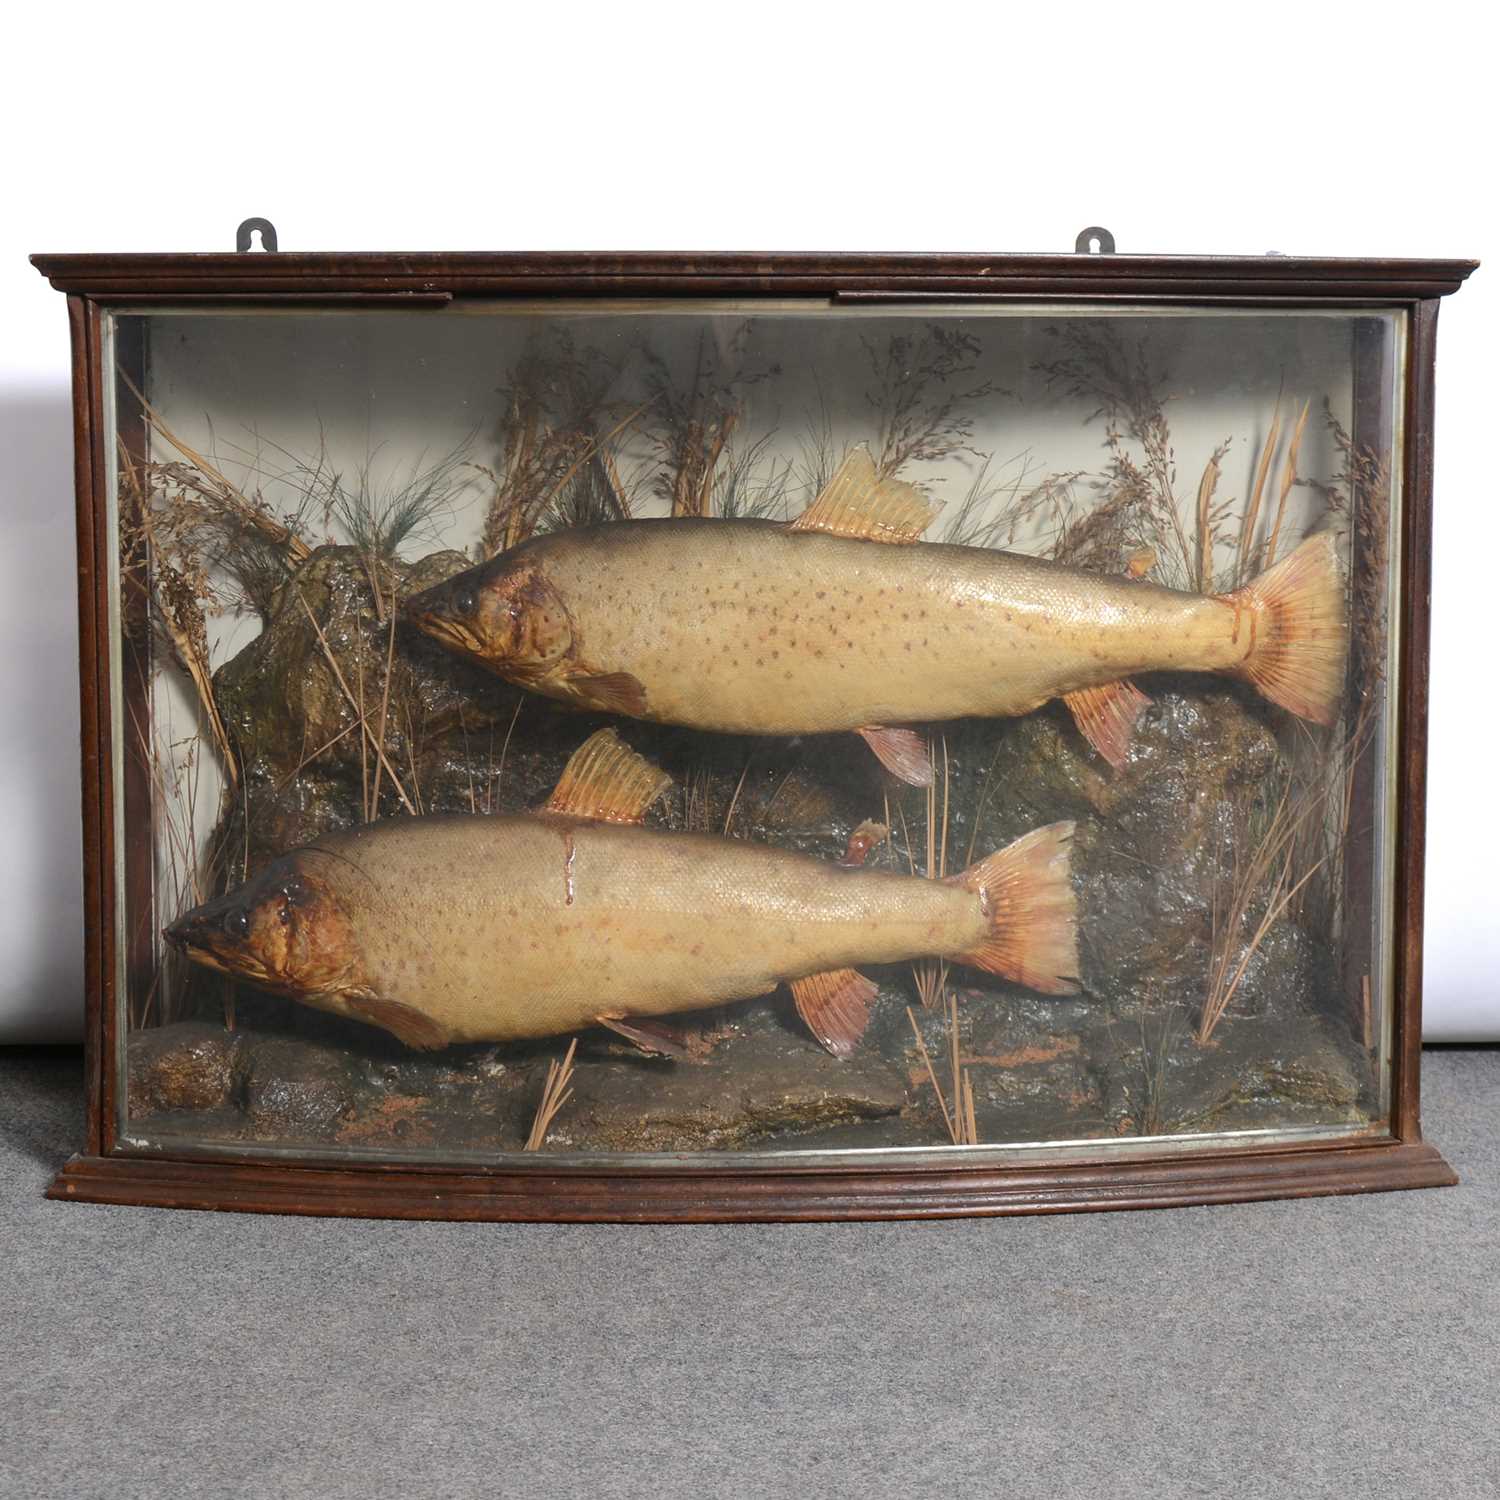 Lot 101 - Taxidermy: A twin presentation of Trout, naturalistically mounted in a bowfront display case.